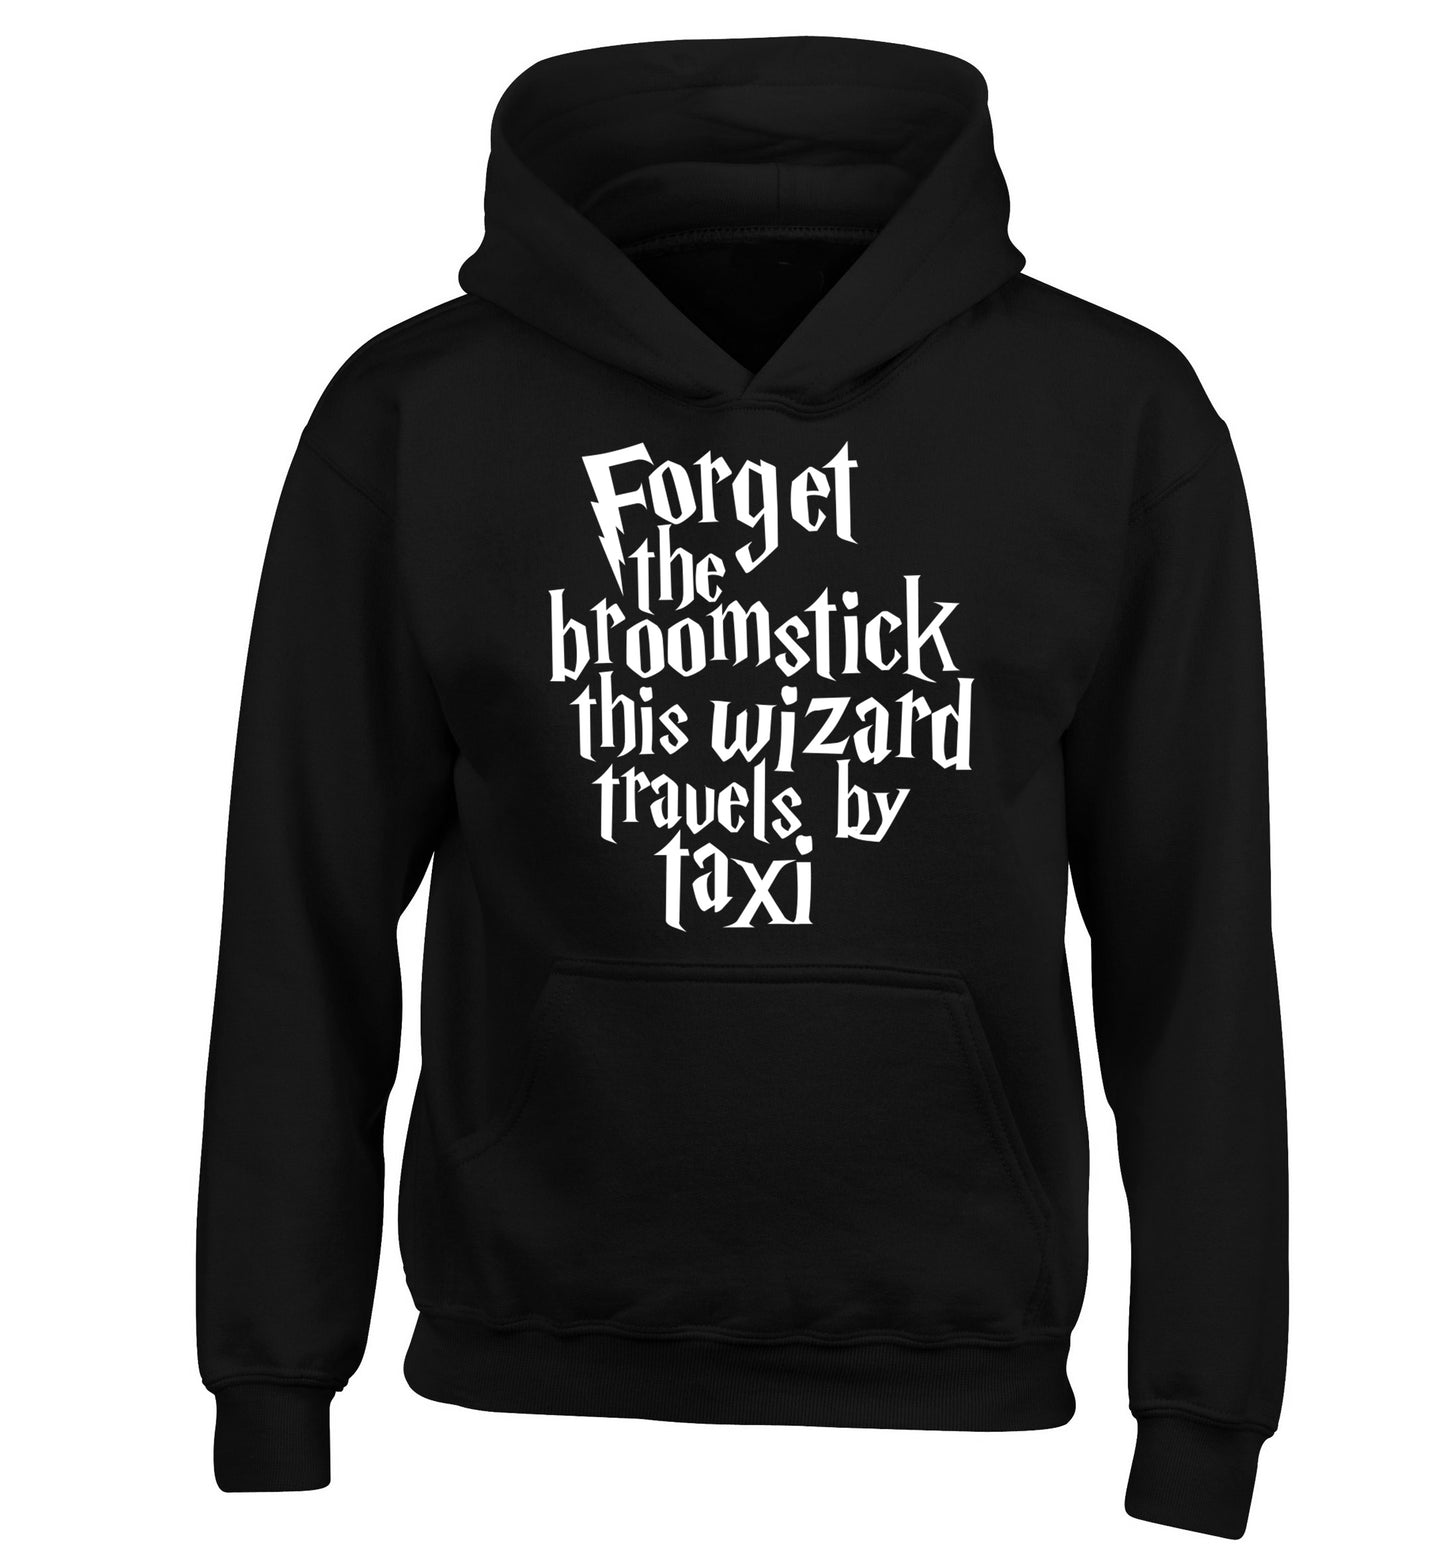 Forget the broomstick this wizard travels by taxi children's black hoodie 12-14 Years